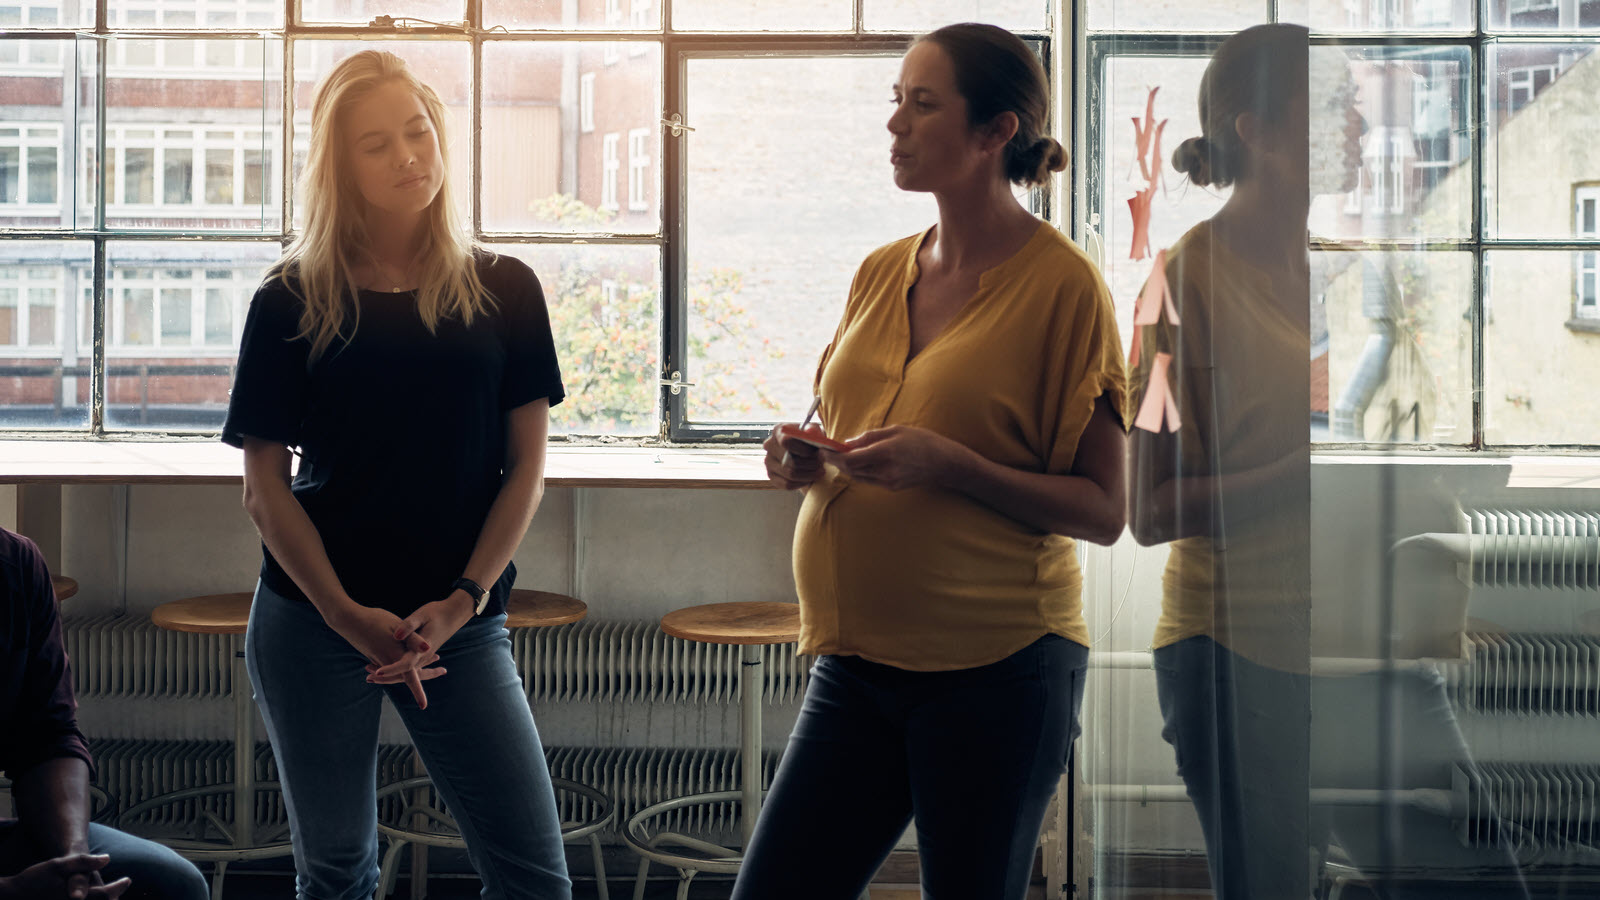 A pregnant woman leading an office meeting